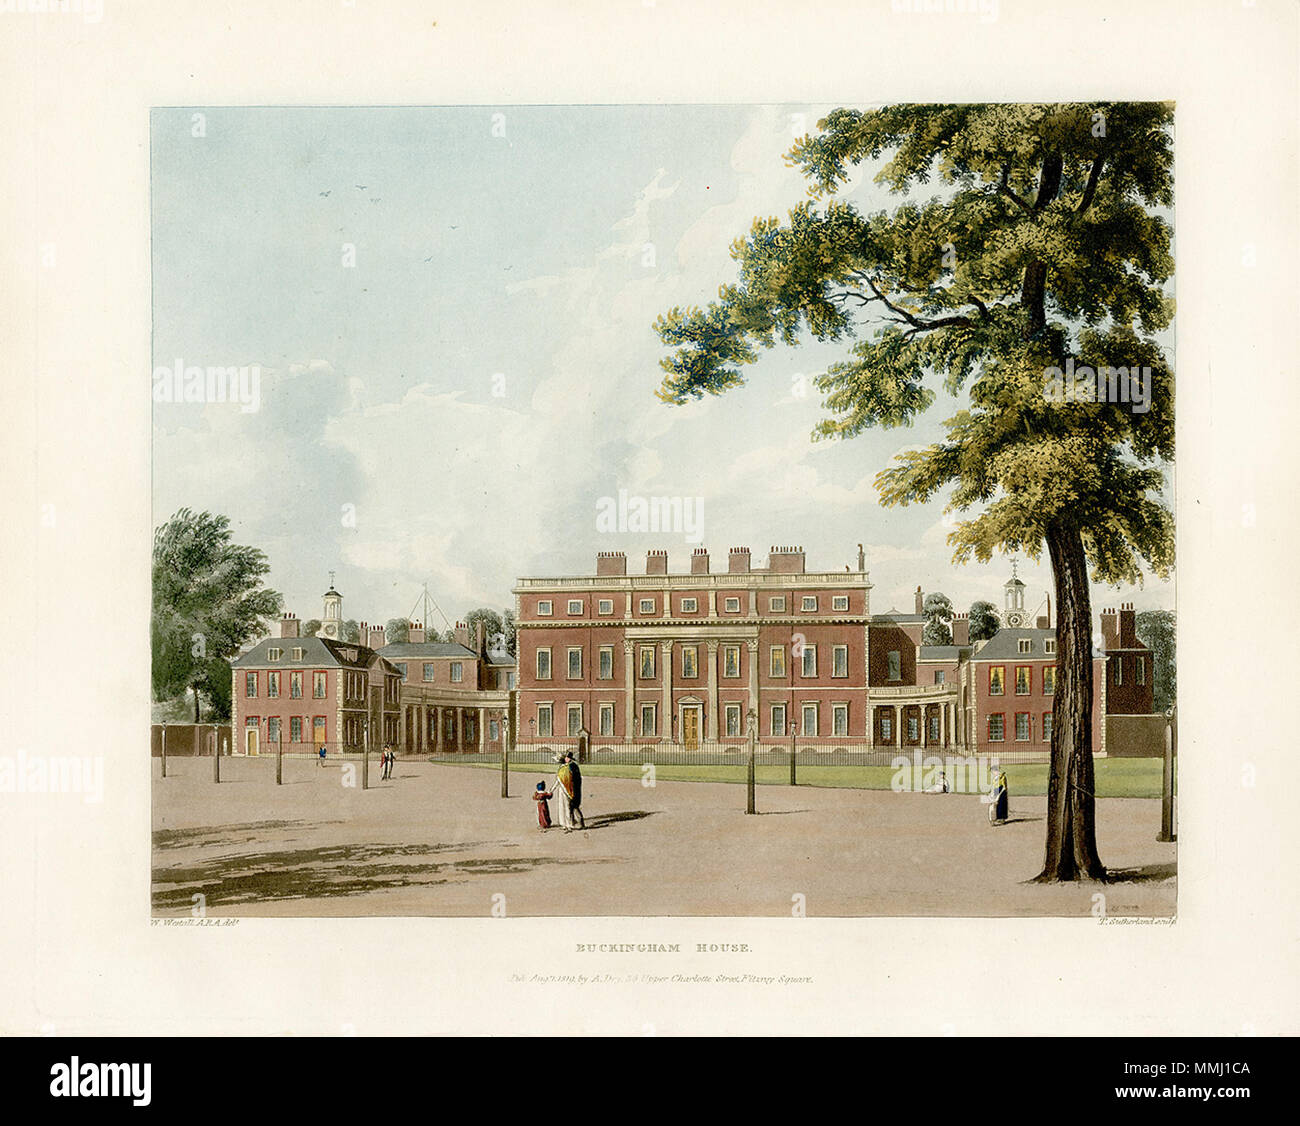 .  English: A view of Buckingham House, later rebuilt as Buckingham Palace  Buckingham House. August 1819. Buckingham House, from Pyne's Royal Residences, 1819 - panteek pyn65-331 Stock Photo